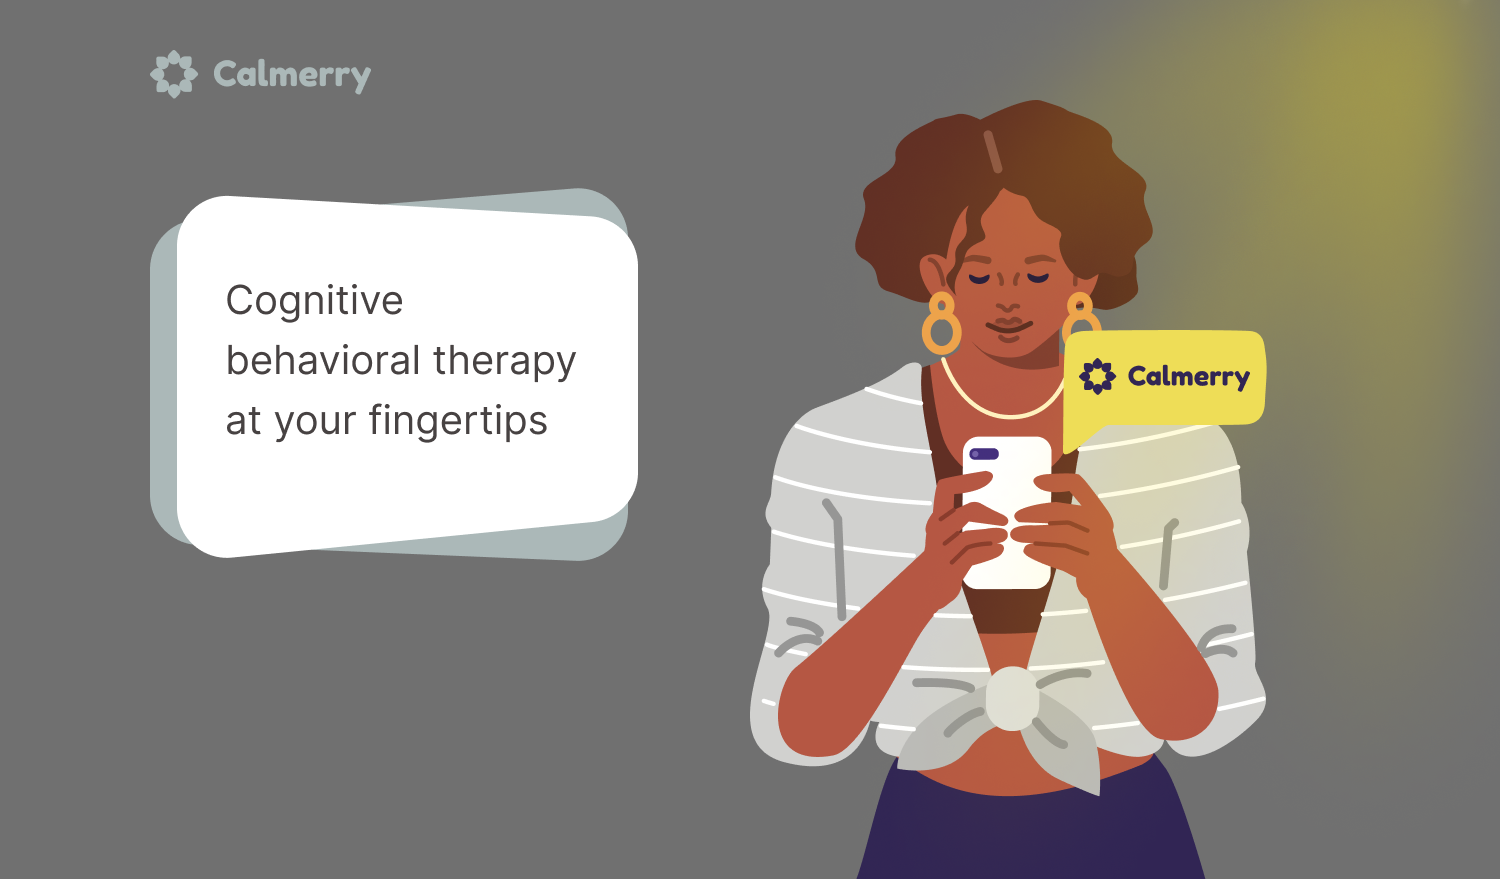 Cognitive behavioral therapy at your fingertips